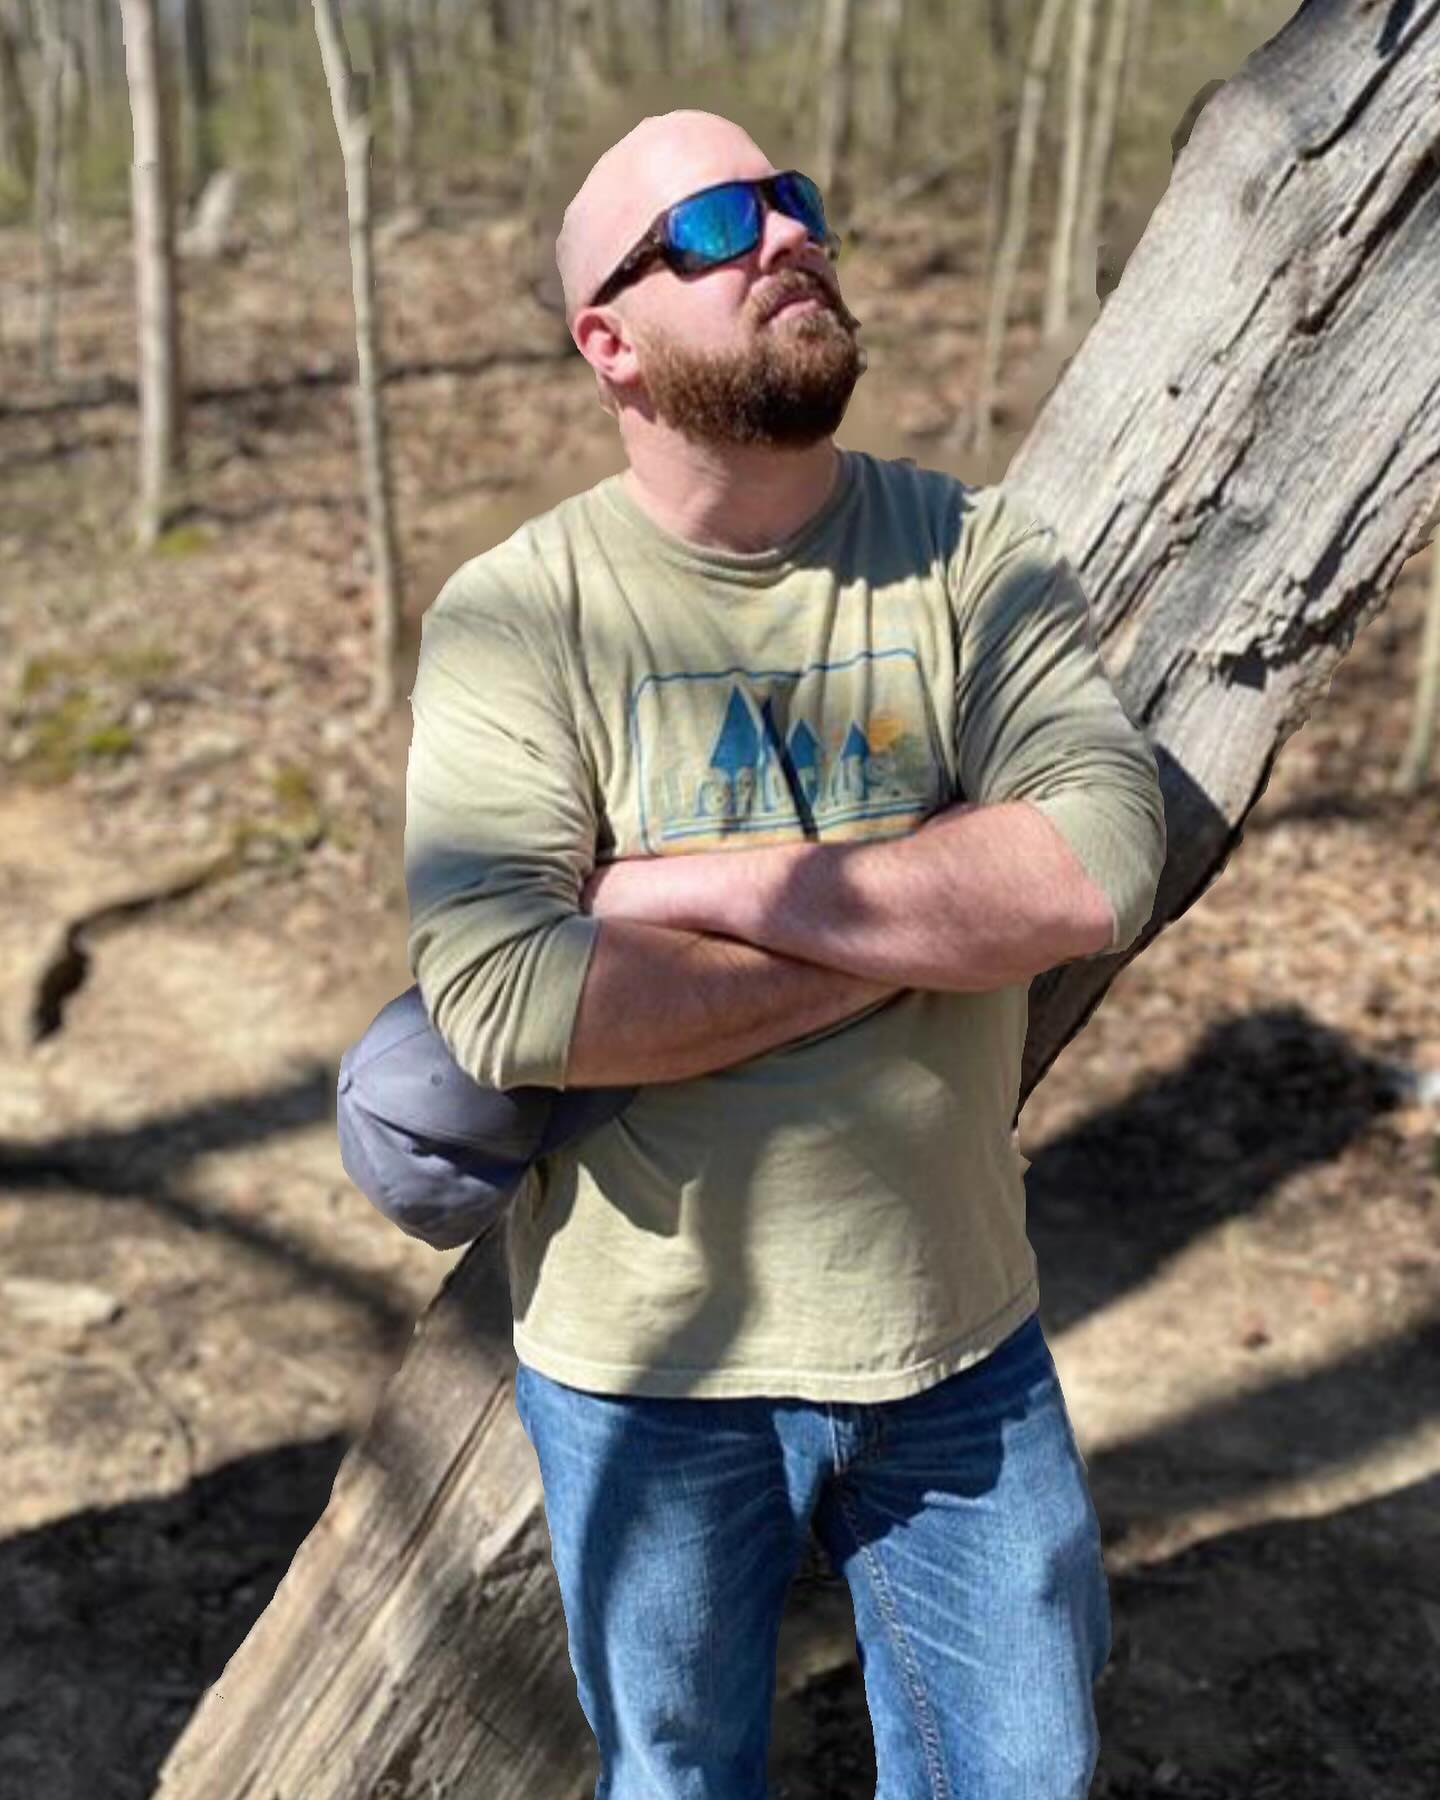 Anyone want to take a hike together? Still love this pic from 2020. 
#bearlove #bearstagram #hairyscruffhomo #hairyscruff #stockybears #beardedhomo #hairybearlife #hairybeardedcub #gaybear #gaybearded #gaycub #beardedgay #instagay #gay #bearsofinstagram #cubsofinstagram #hairychest #gaysofinstagram #scruff #bear #hairy #fur